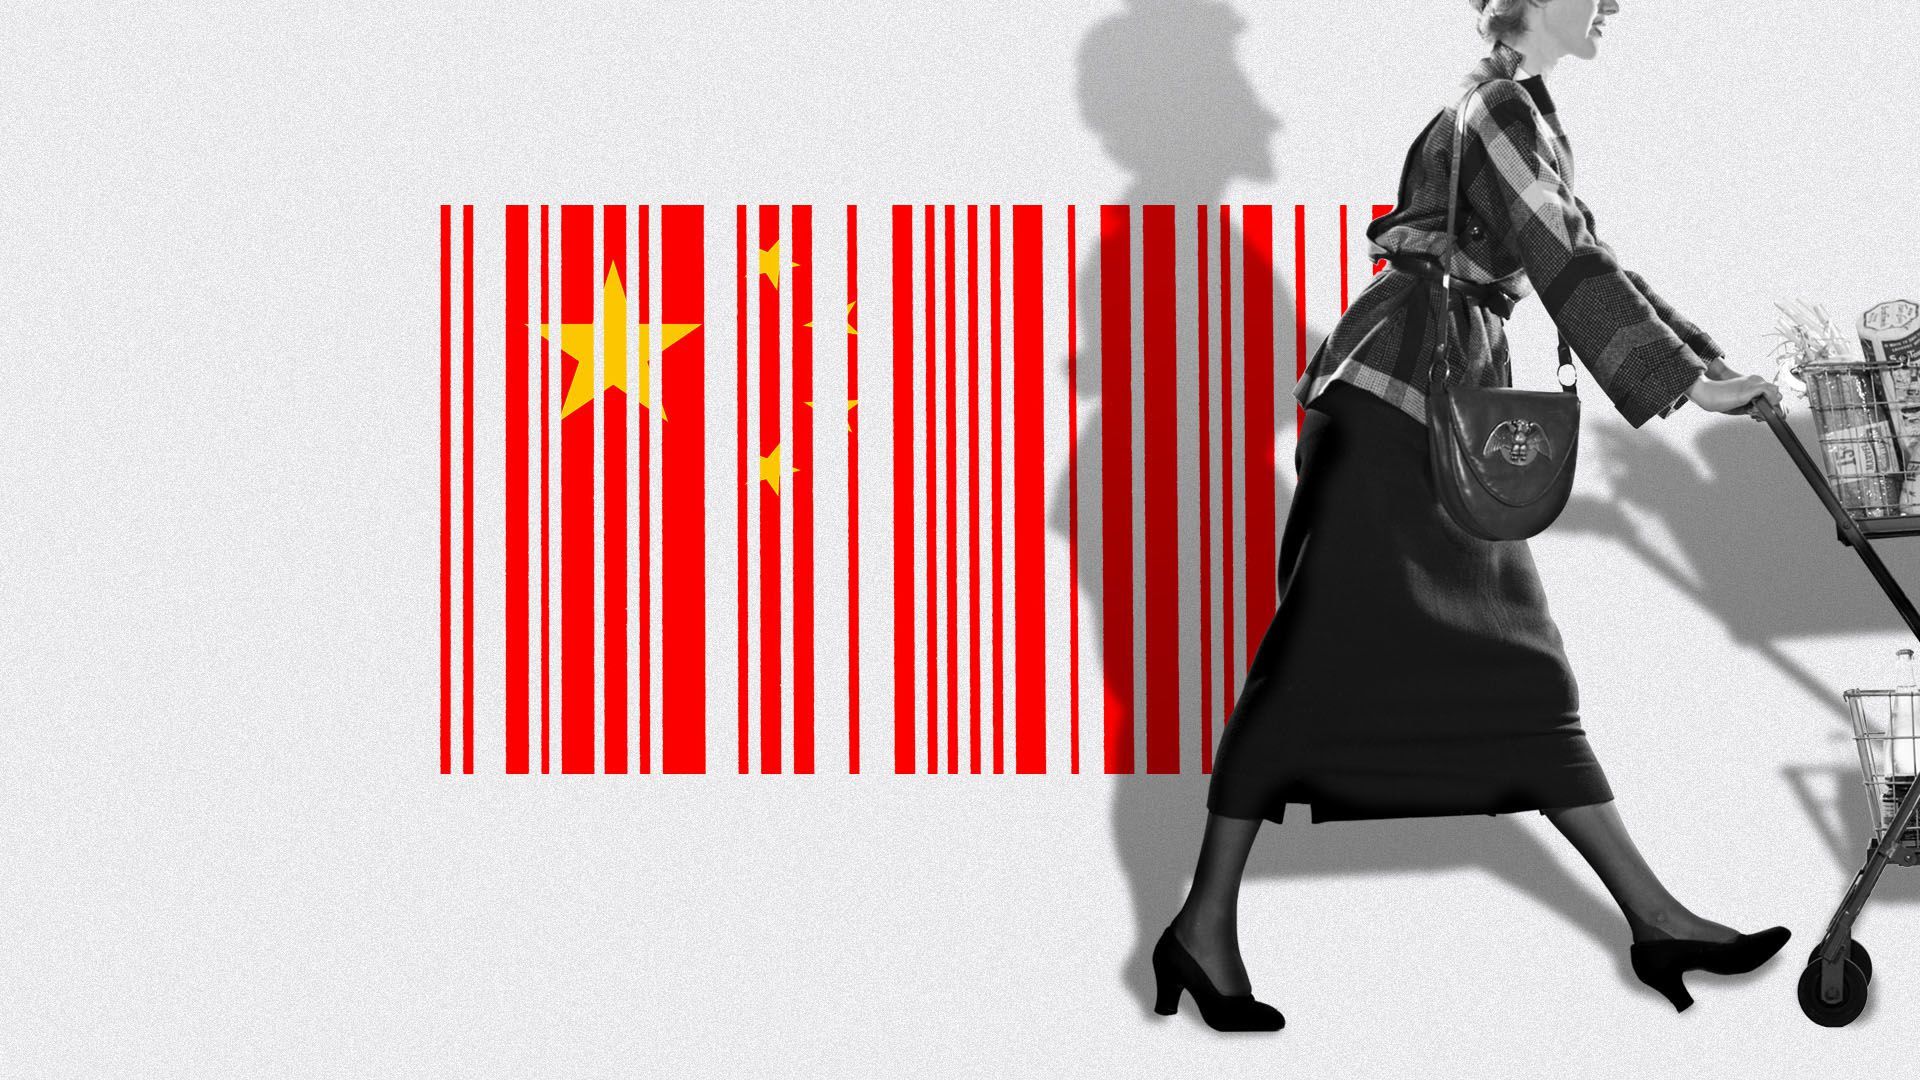 An illustration of a chinese flag that looks like a bar code.